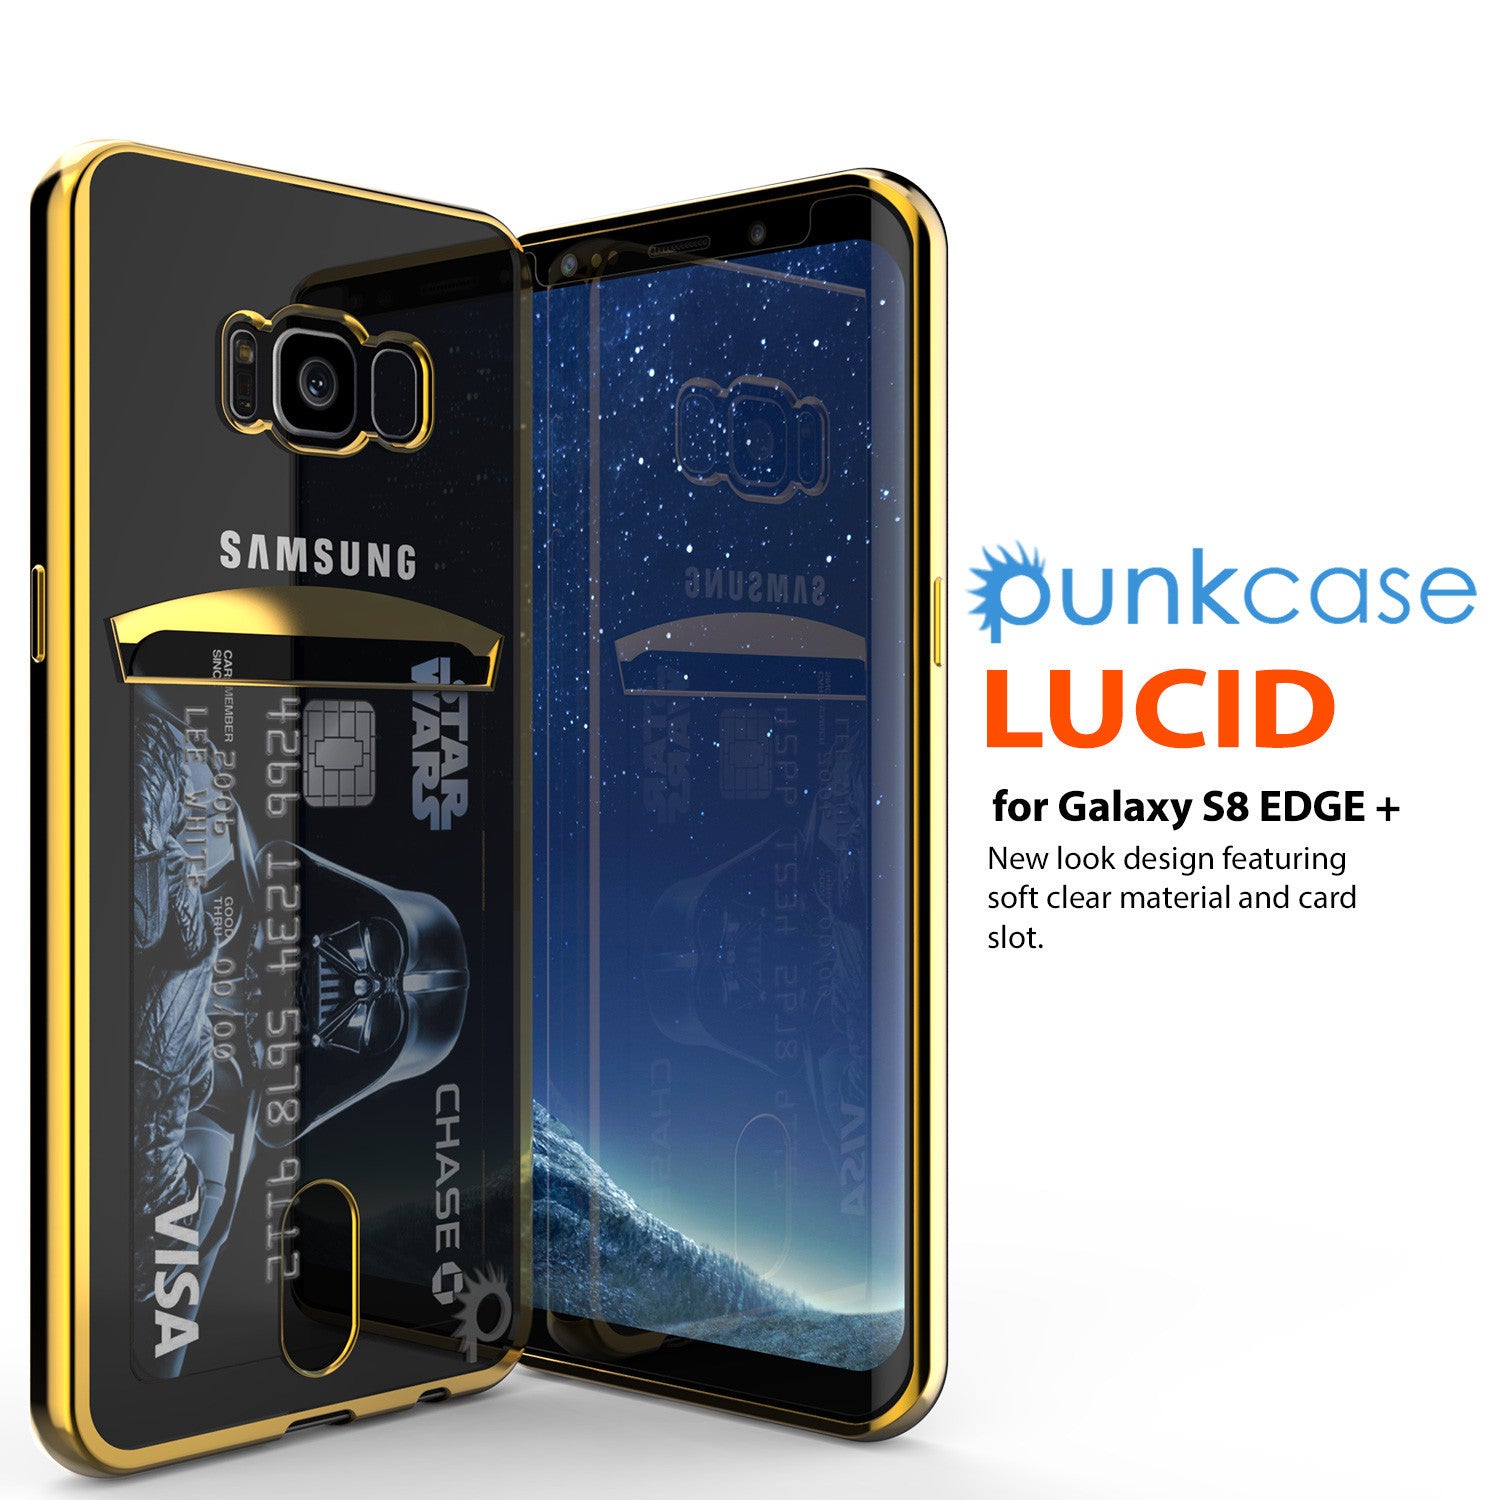 Galaxy S8 Plus Case, PUNKCASE® LUCID Gold Series | Card Slot | SHIELD Screen Protector | Ultra fit